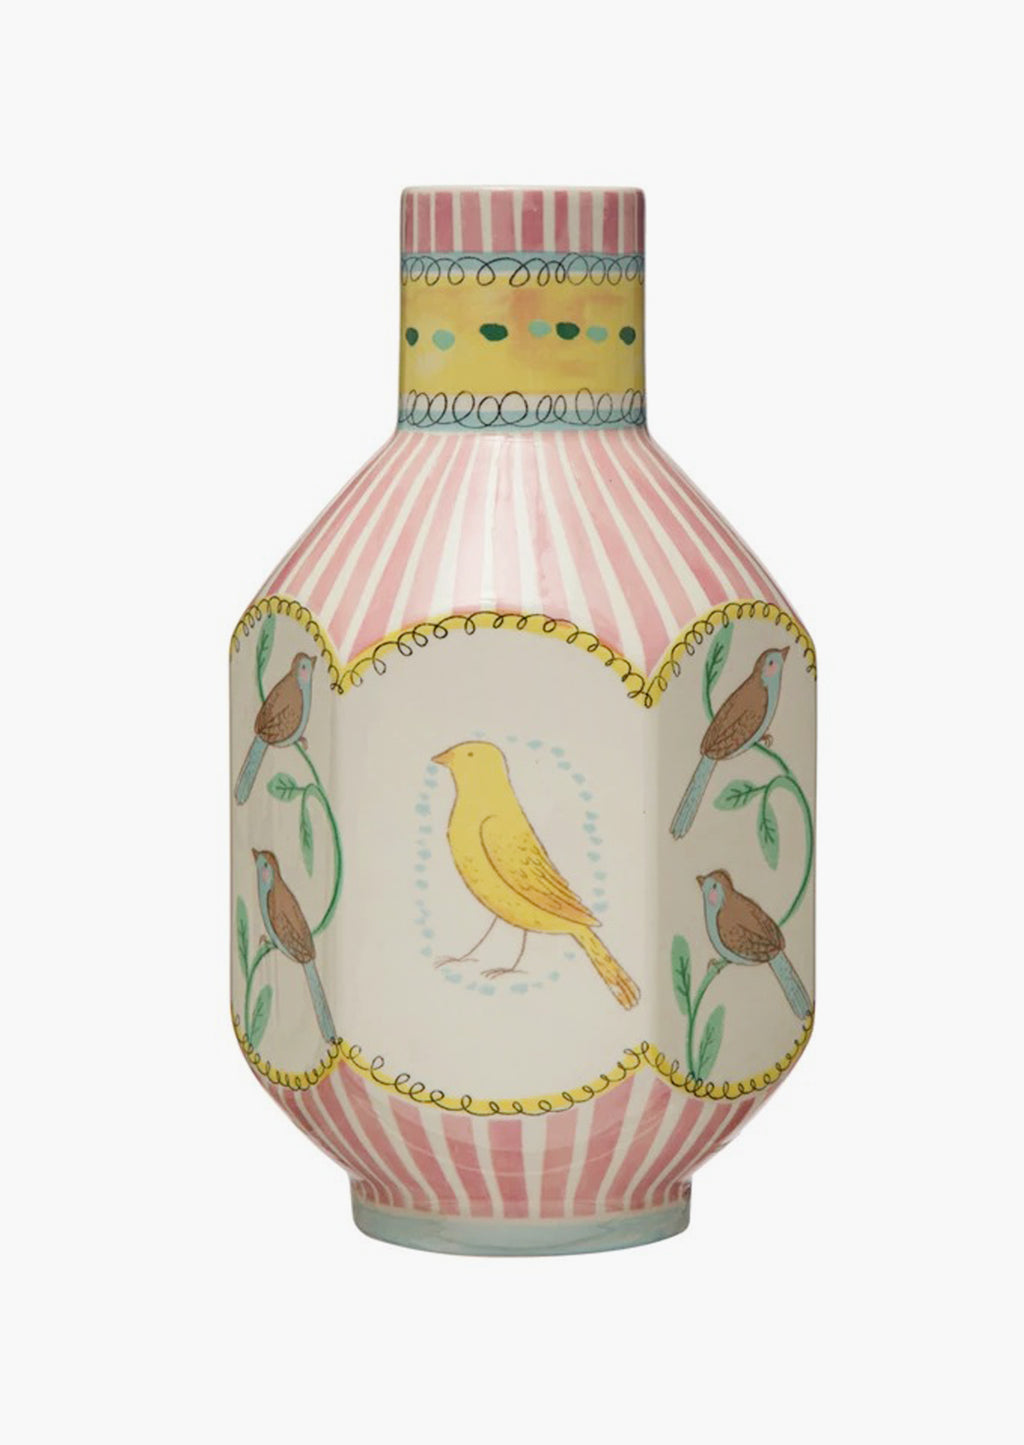 2: A graphic print vase with pink stripes and three-dimensional shape with bird motif.